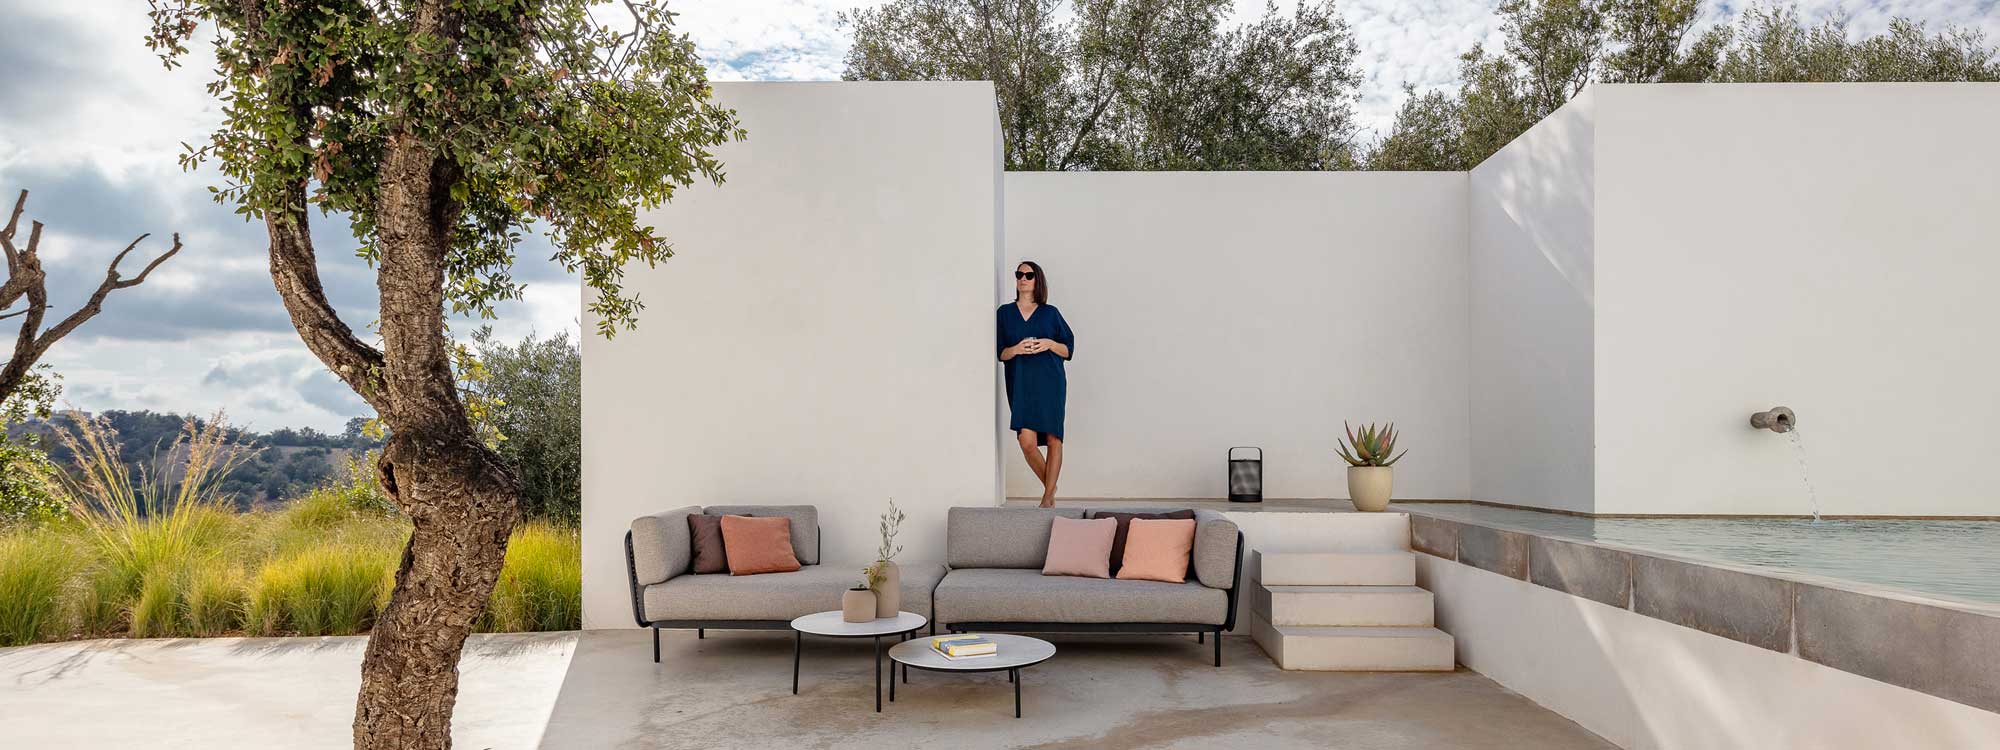 Image of Baza modern outdoor sofa on Portuguese terrace between olive tree and swimming pool